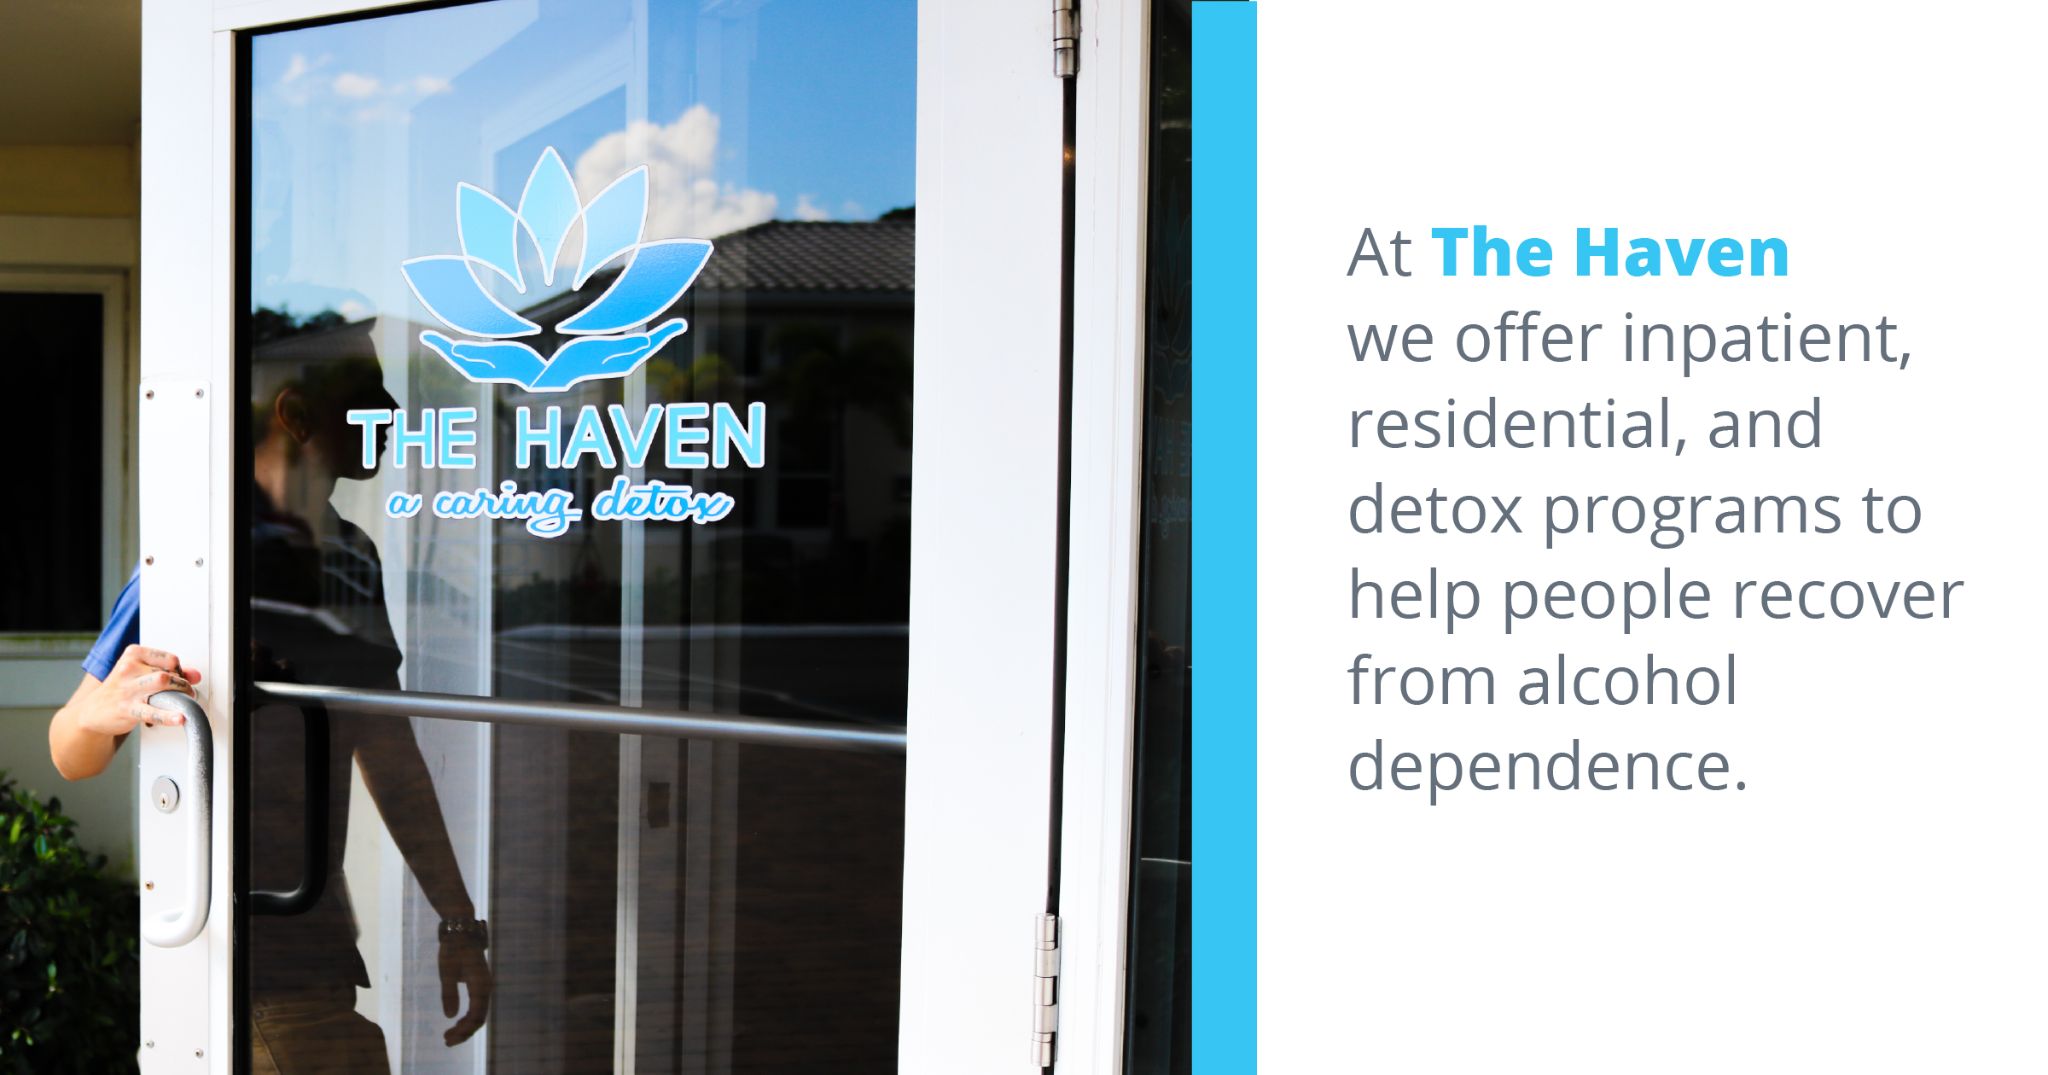 At the haven we offer inpatient residential and detox programs to help people recover from alcohol dependance